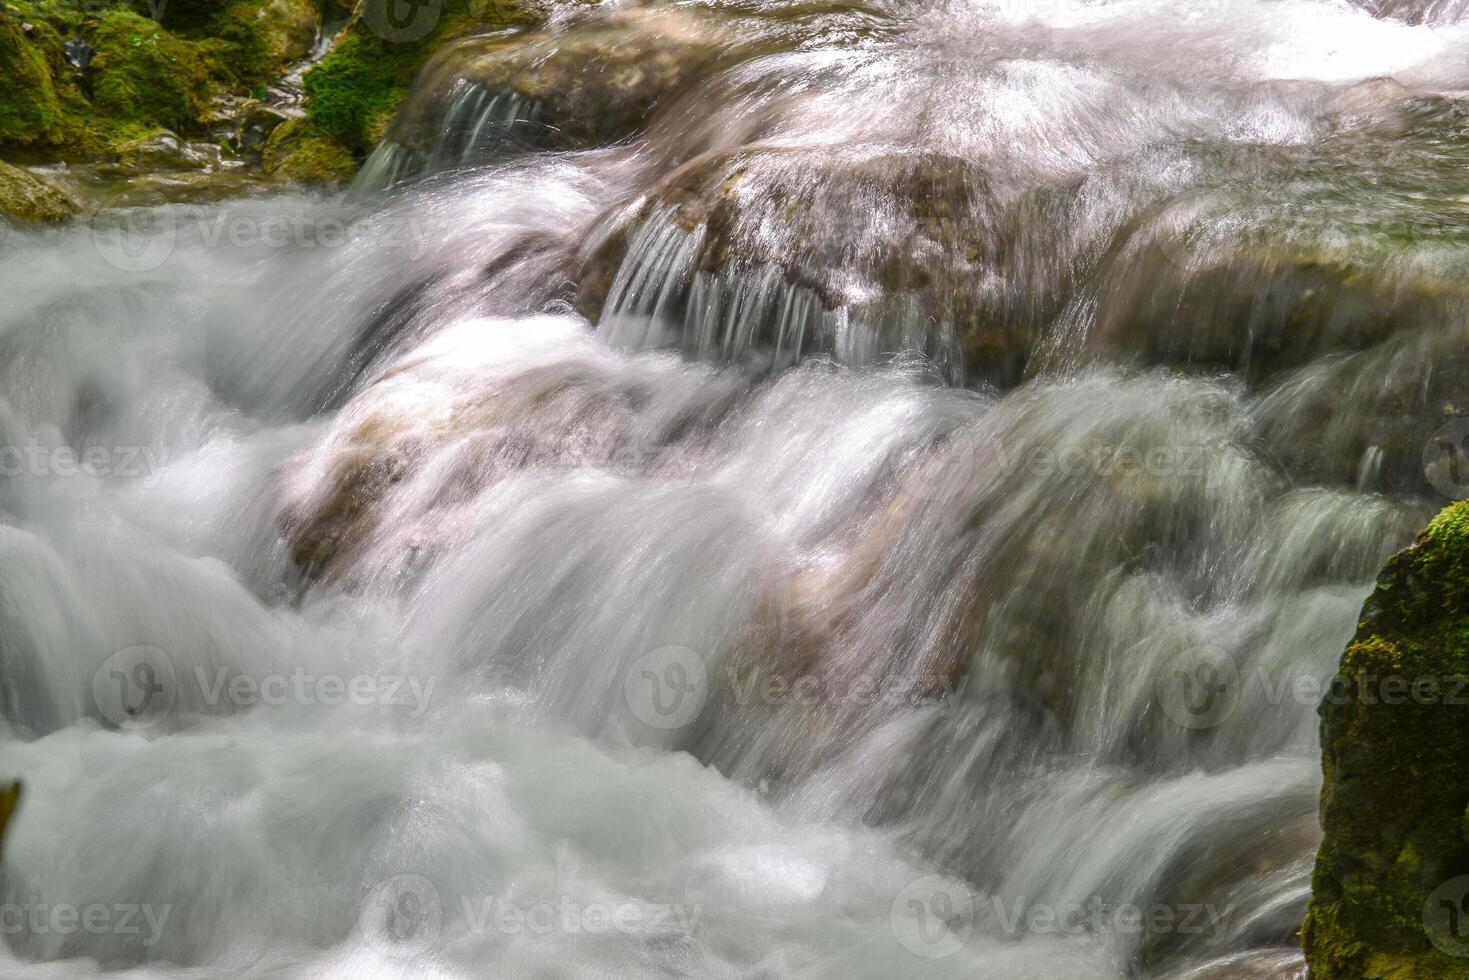 Mountain stream in the forest - long exposure and flowing water photo